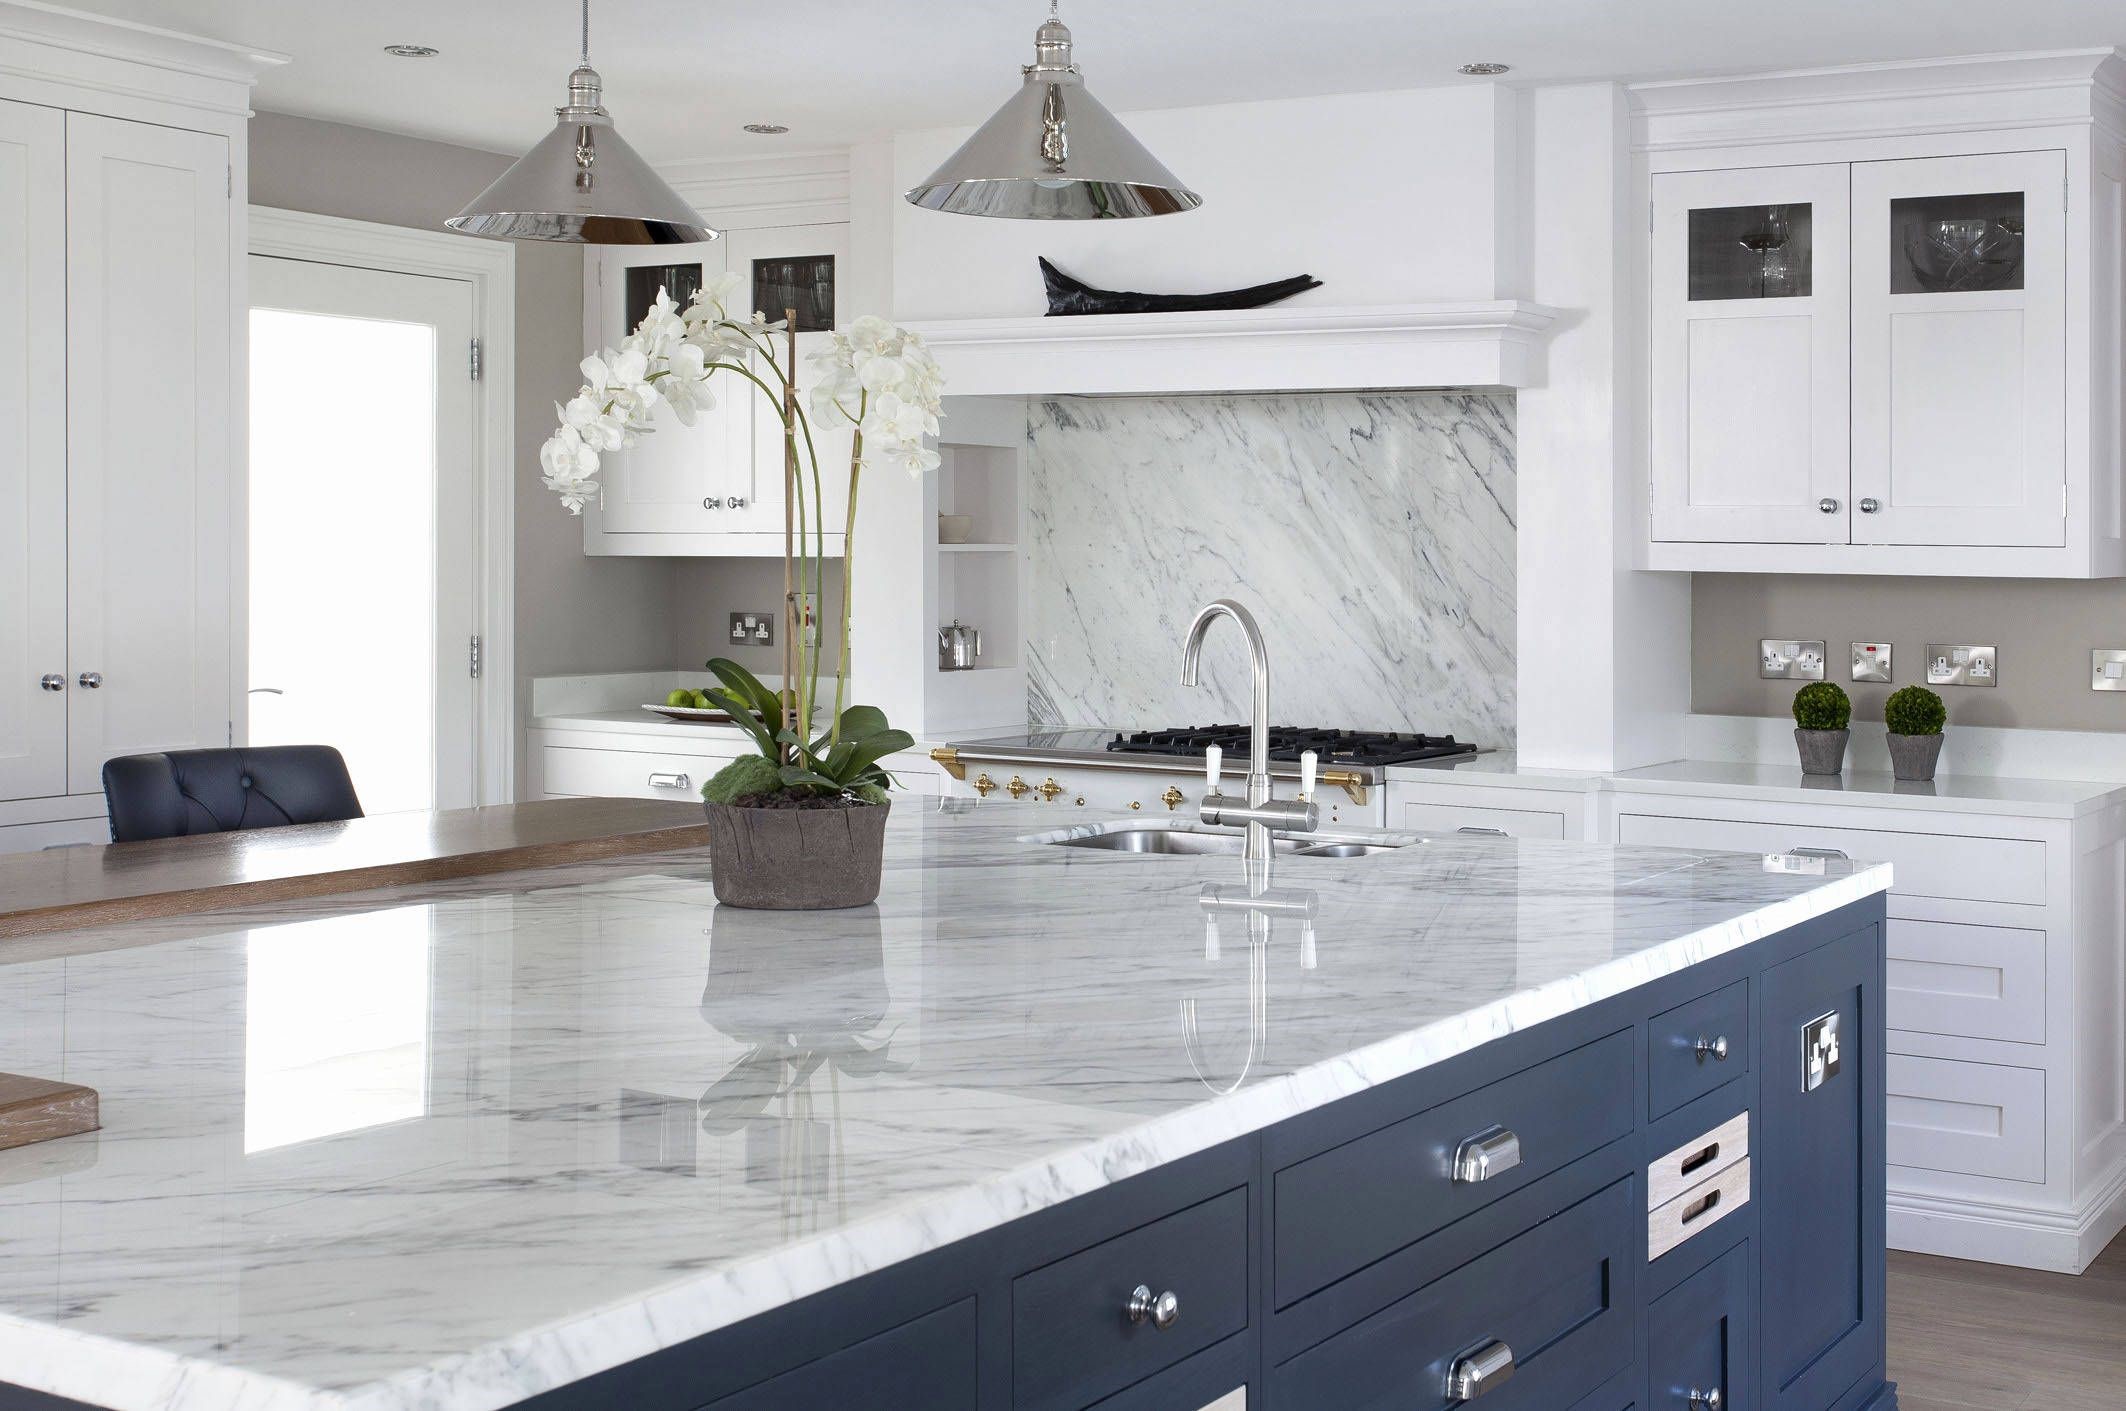 Upgrade Your Home Decor With The Elegance Of Quartz Countertops ...